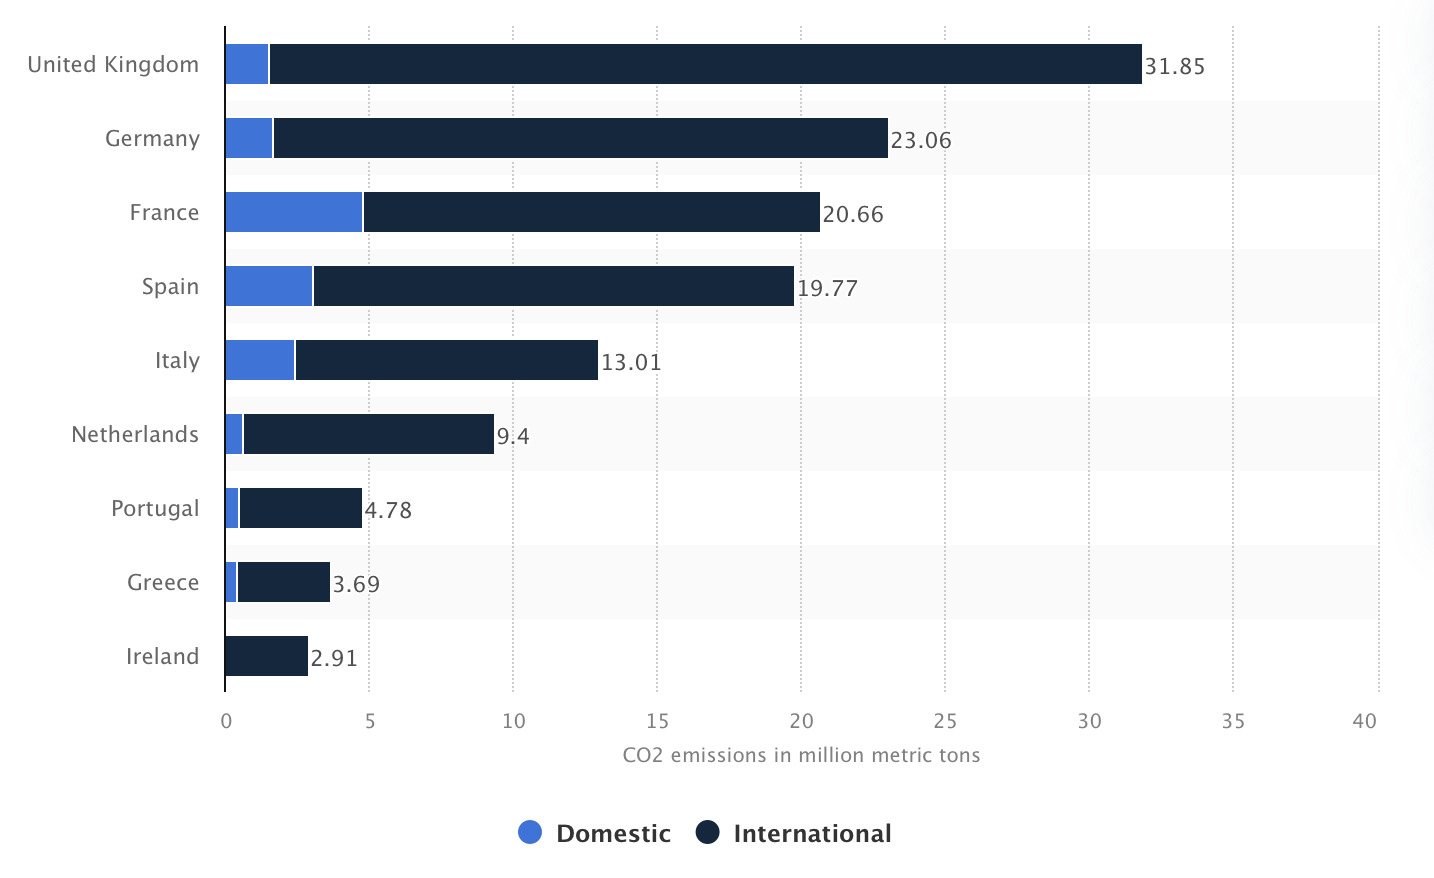 CO2 emissions from domestic and international commercial aviation in the European Union in 2019, by select departure country (in million metric tons) (Source: Statista)